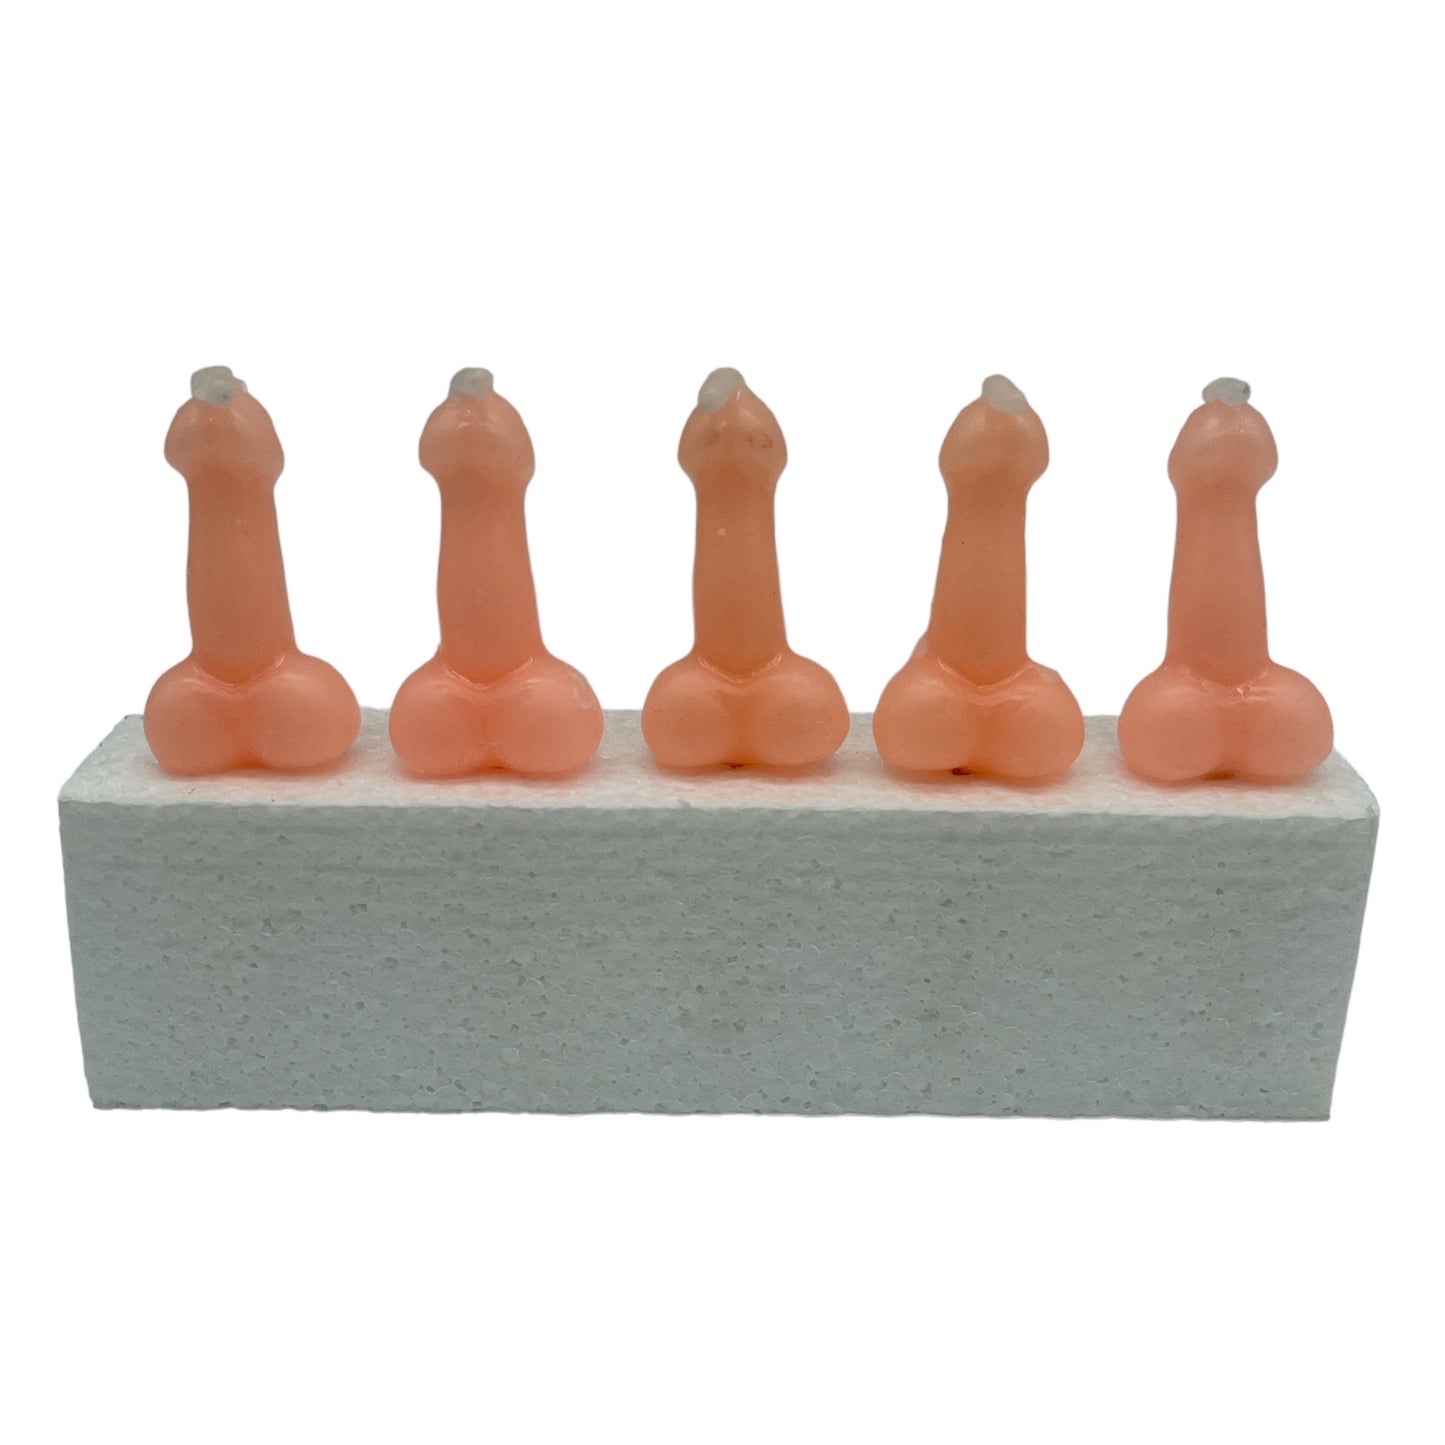 Piemel Candles - Playful Atmosphere Makers in Beige, Pink and Purple (Set of 5)